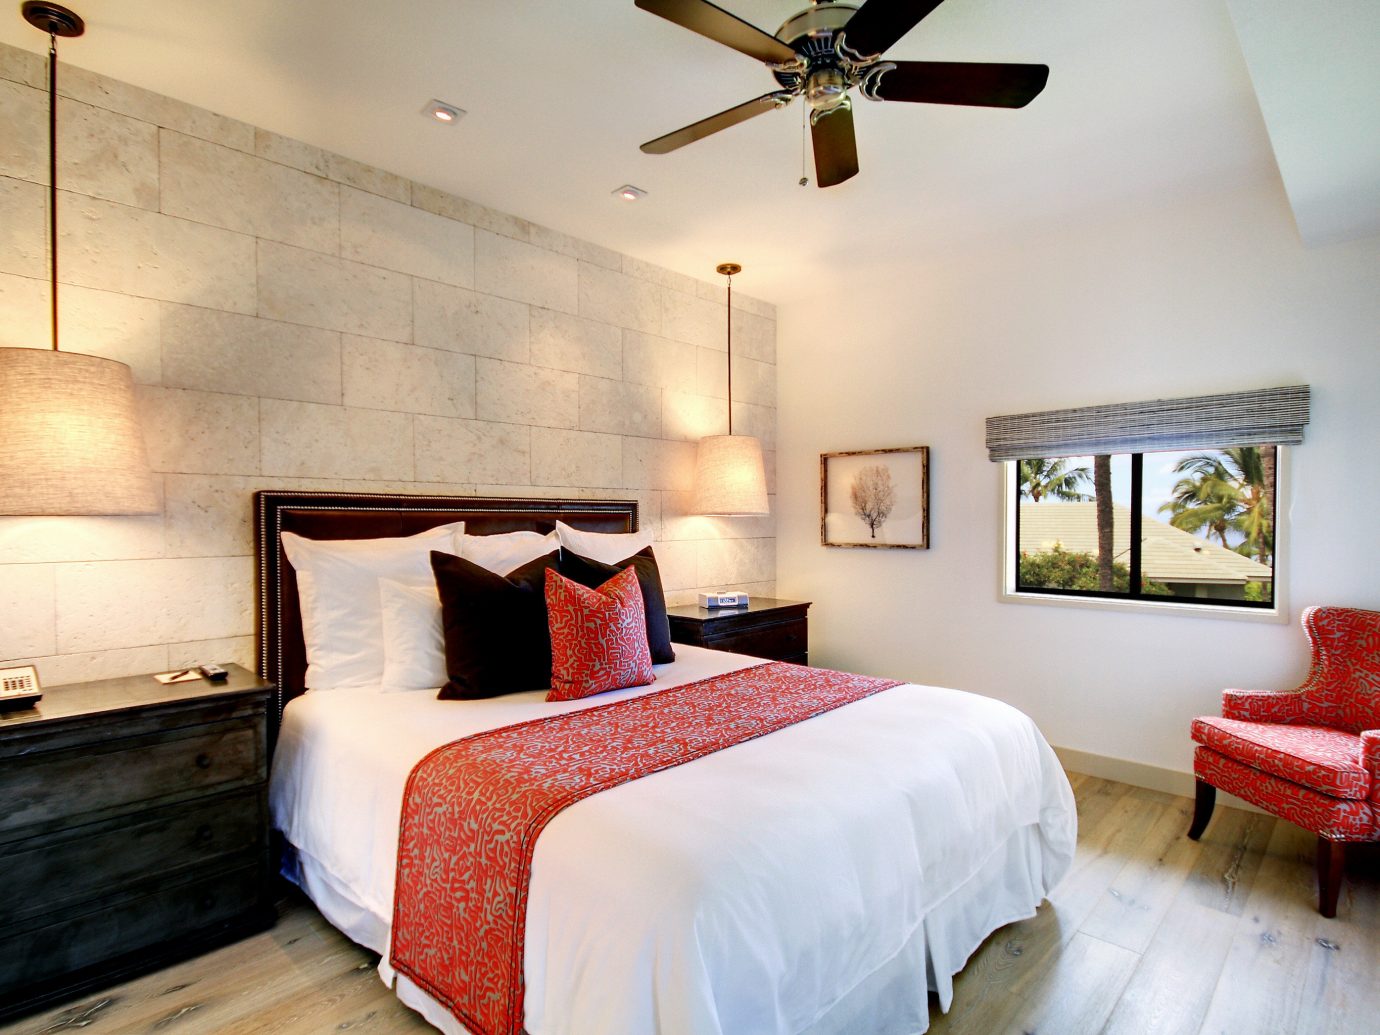 Beach Bedroom Boutique Hotels Classic Hotels Island Luxury Travel Romance Scenic views Suite bed indoor wall floor room property hotel building estate red cottage home real estate interior design farmhouse Villa apartment